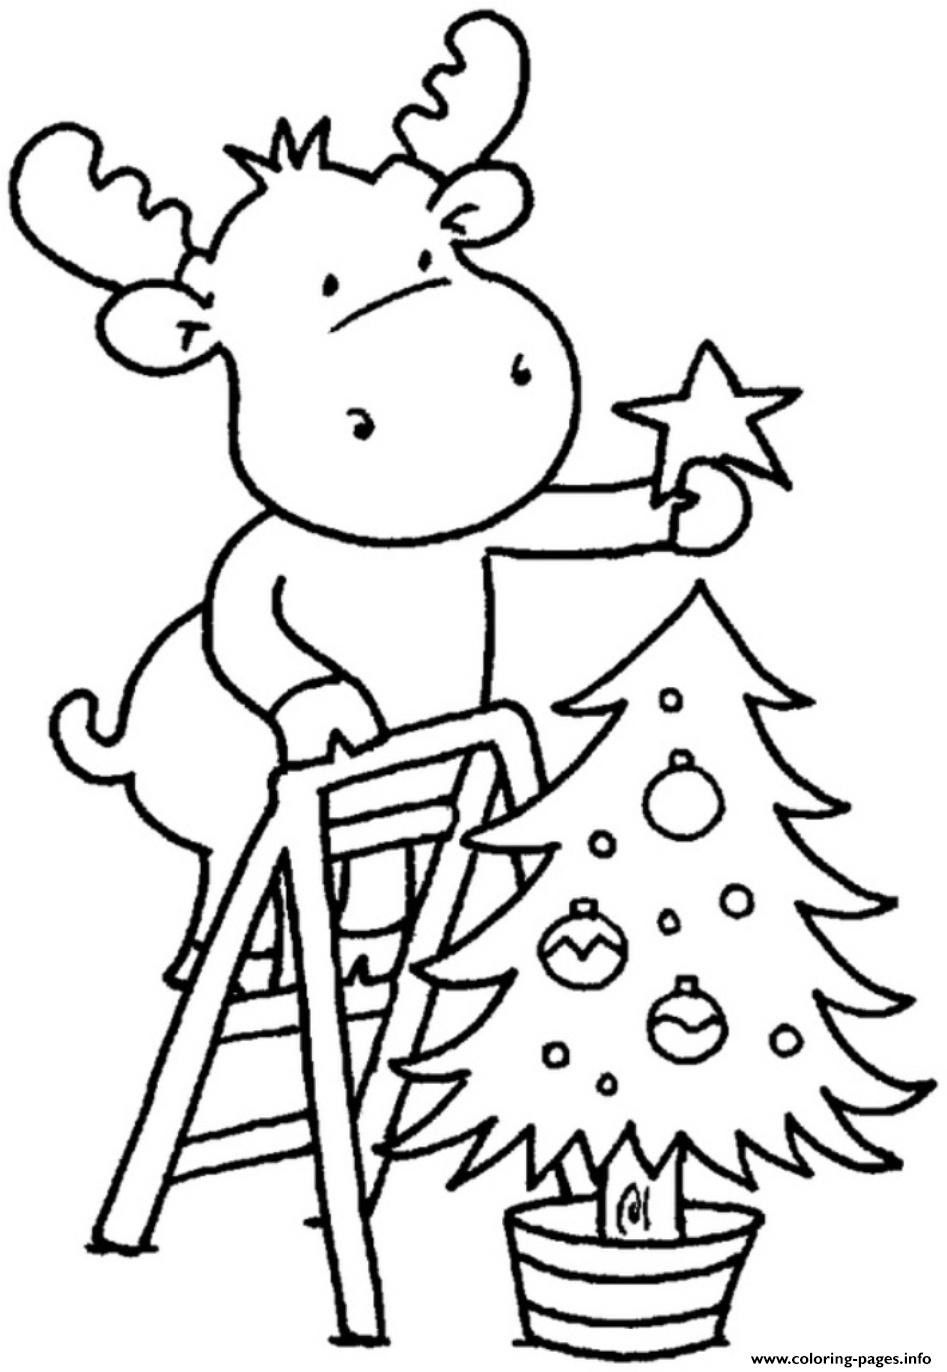 Christmas Tree Coloring Pages For Kids
 Christmas Tree For Children Coloring Pages Printable